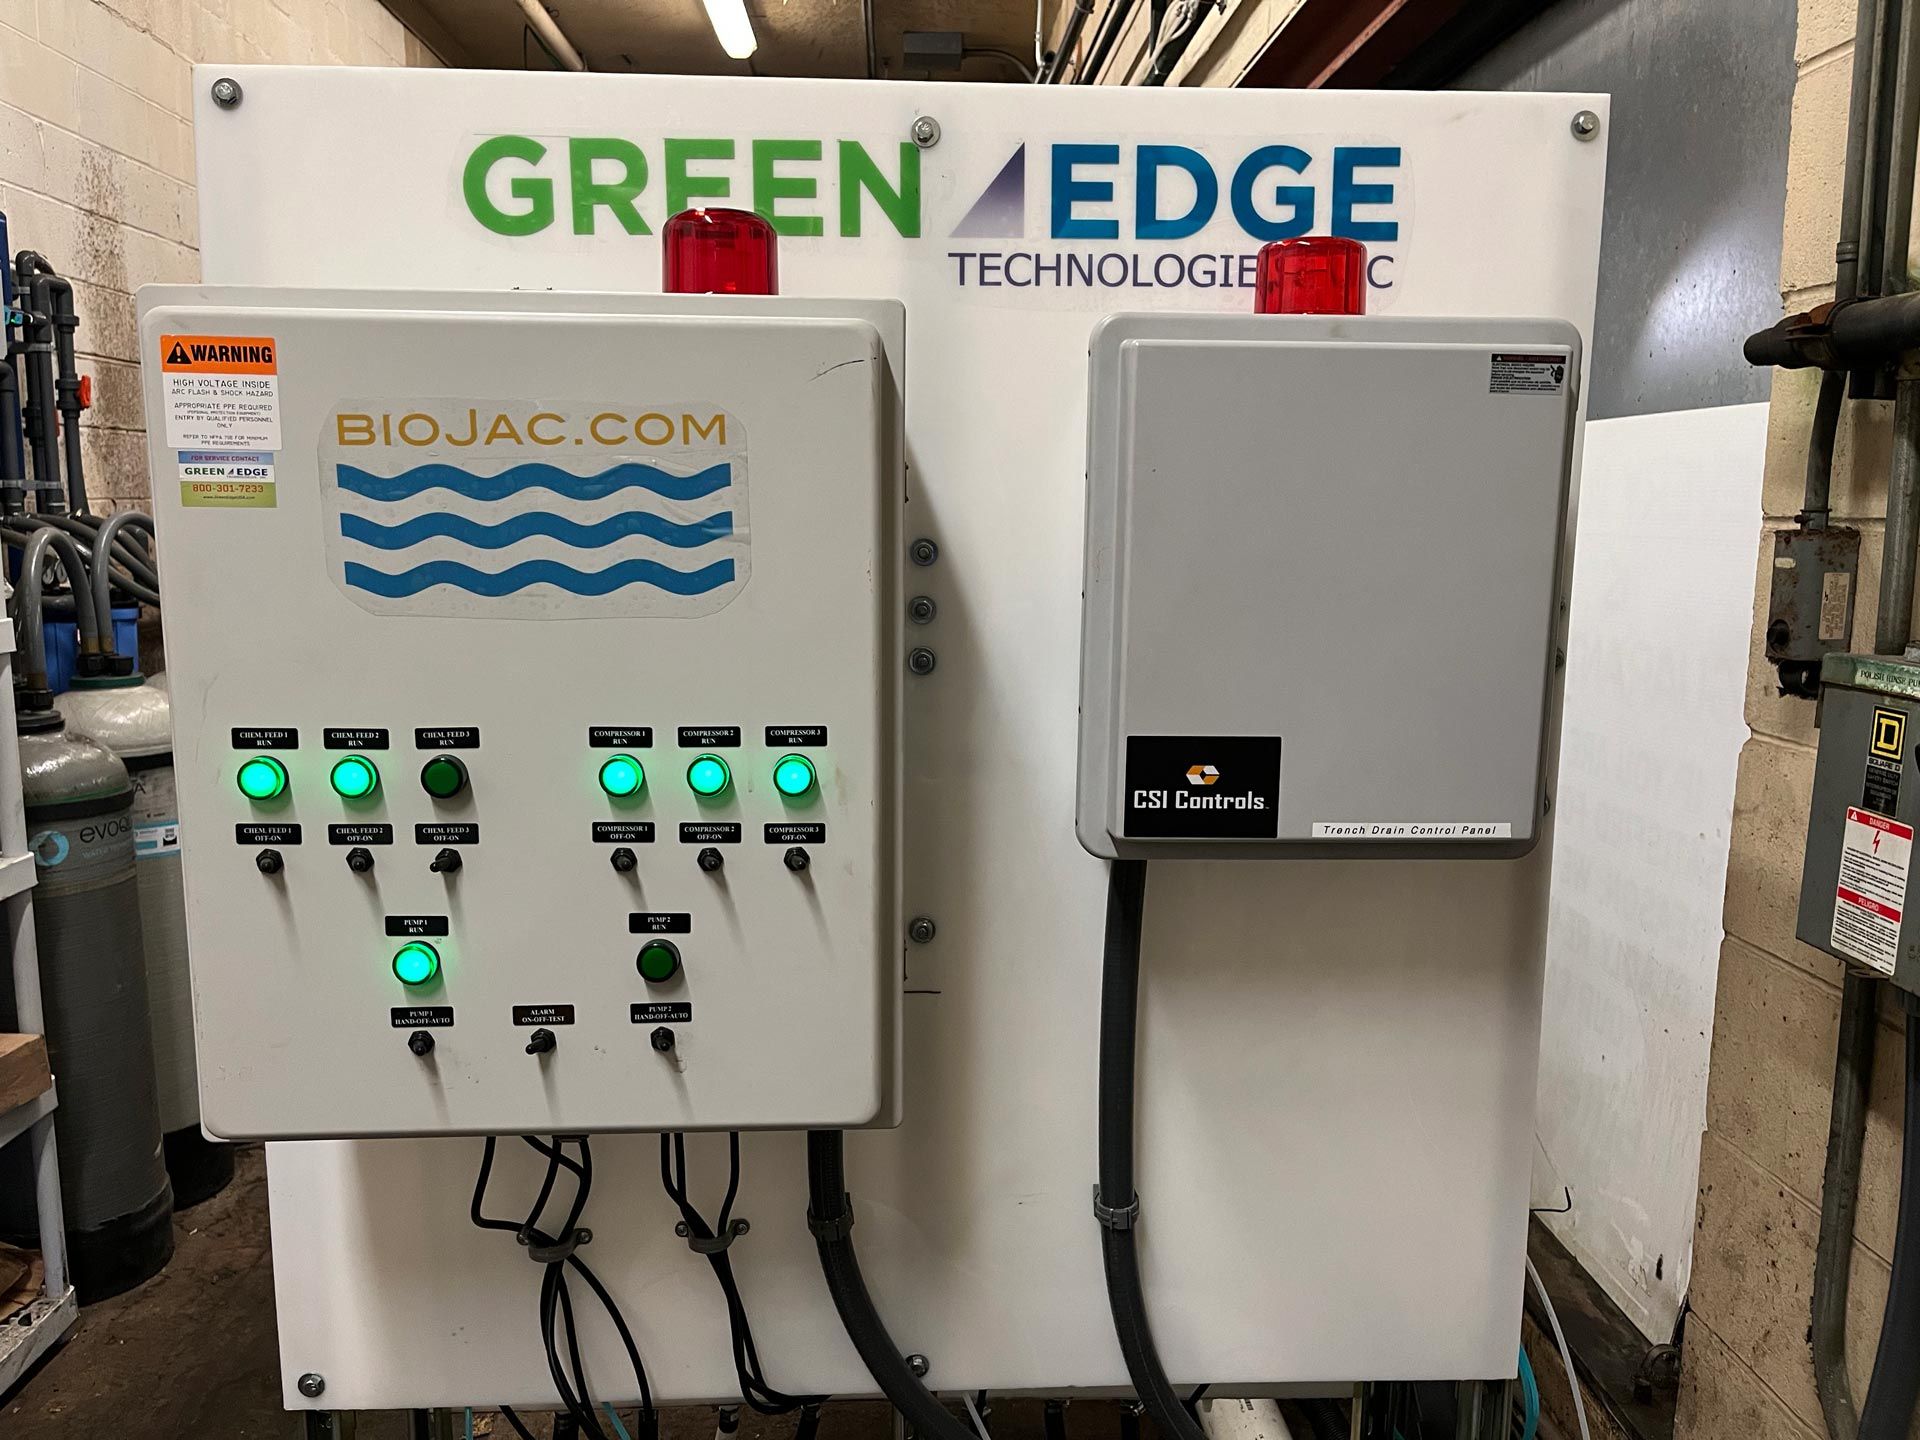 GreenEdge Technologies, a leader in water reclamation, has tailored the BioJac™ System for car washes and wash bays.